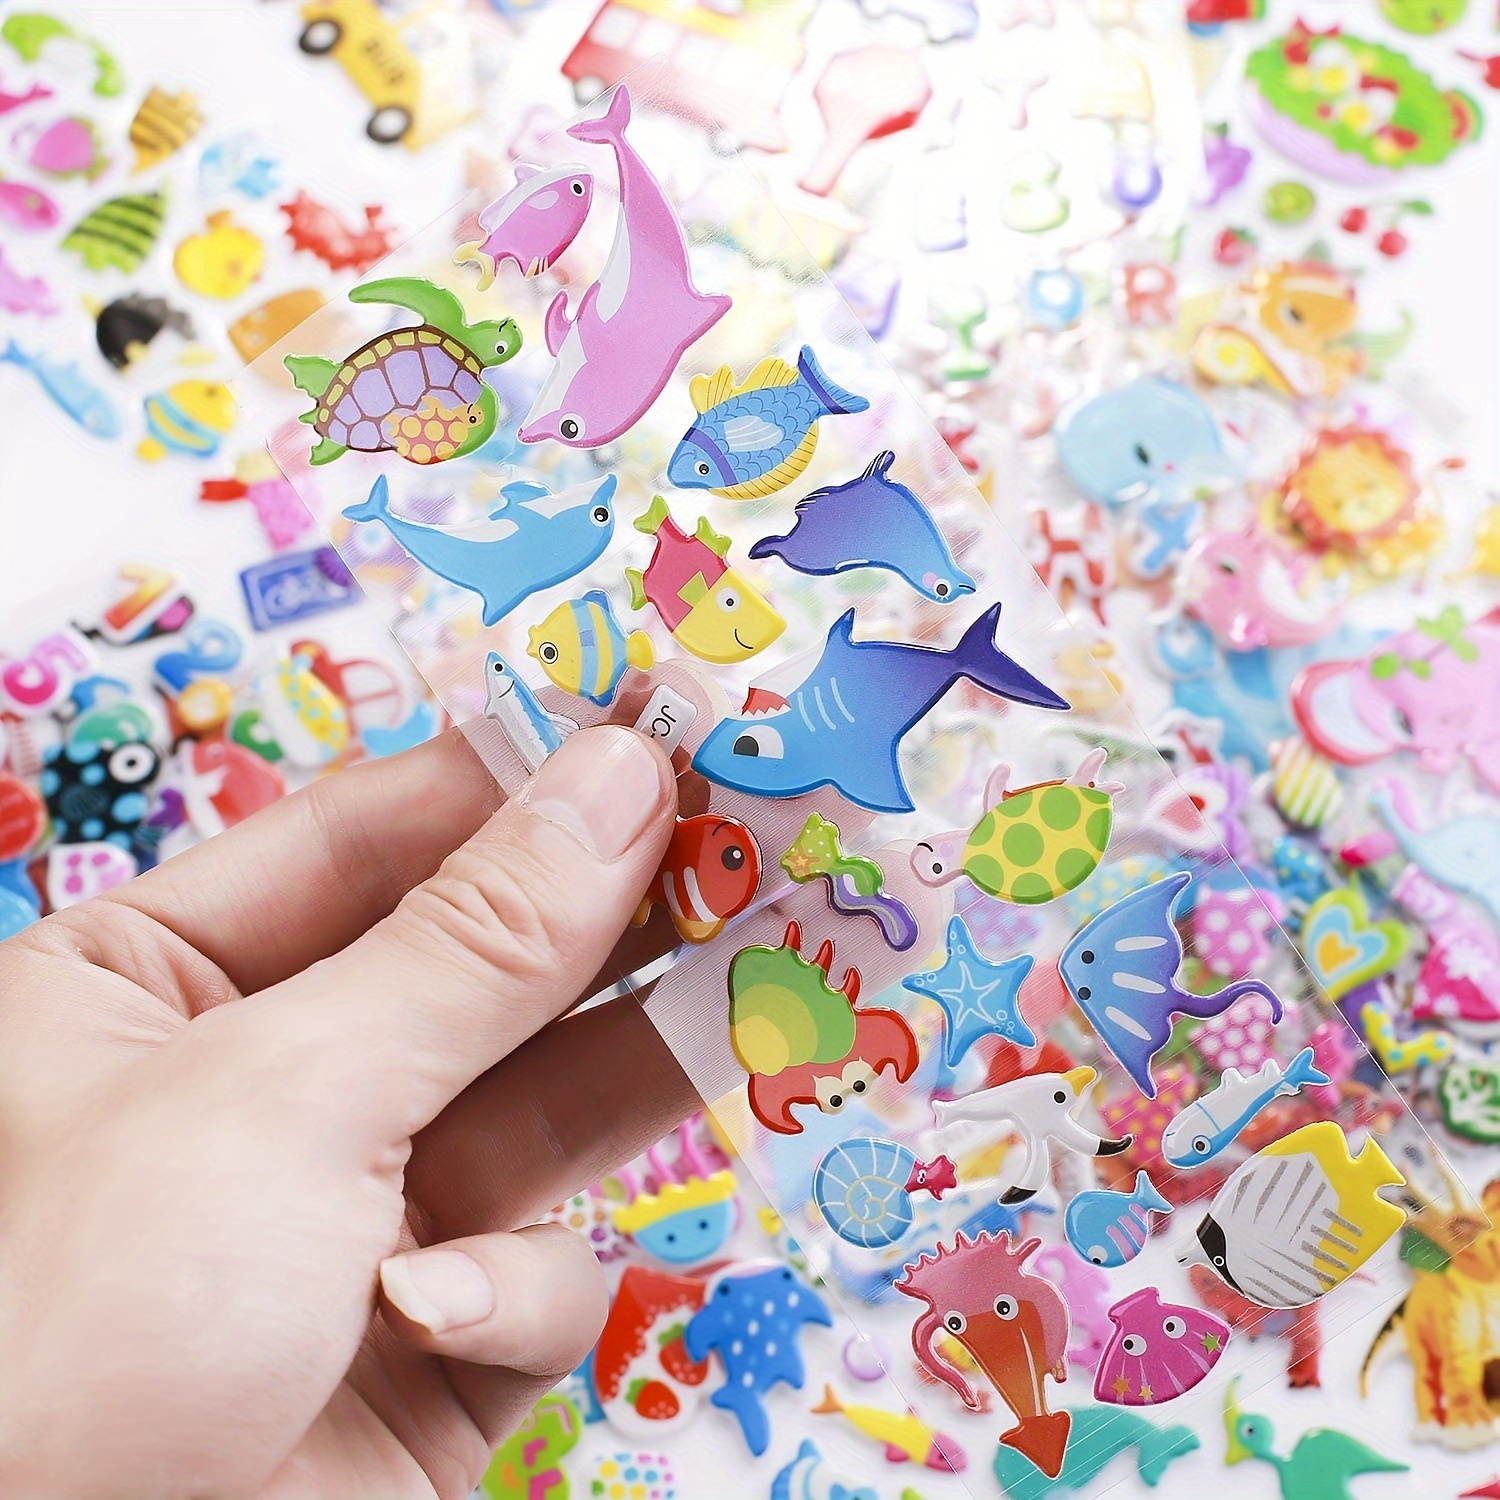 3D Stickers for Kids & Toddlers 760 Puffy Stickers, Pack for Scrapbooking  Bullet Journal Including Animal, Numbers, Fruits, Fish, Dinosaurs,Planet